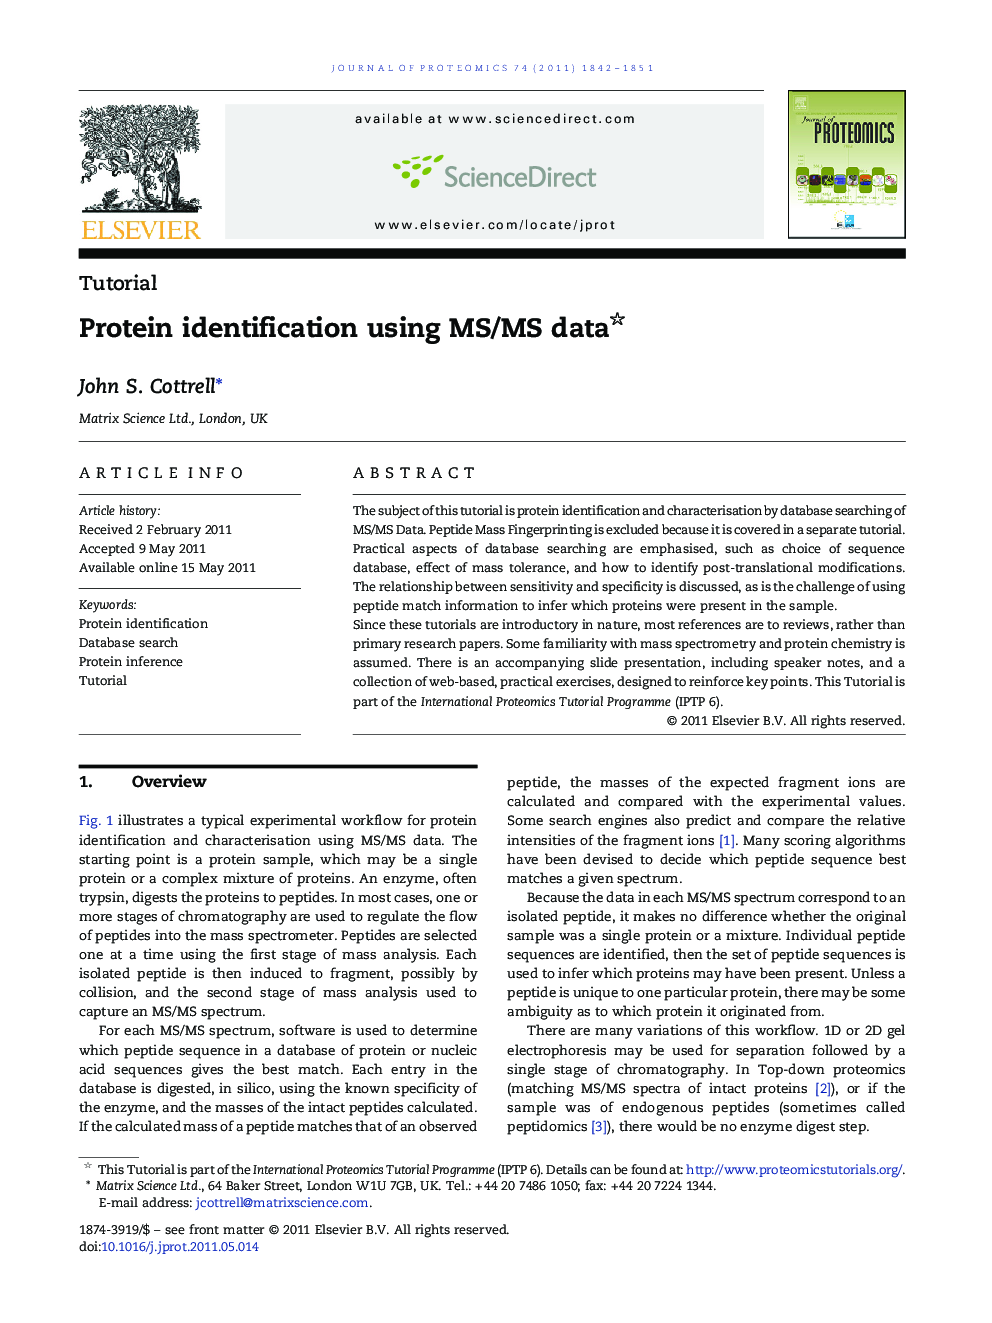 Protein identification using MS/MS data